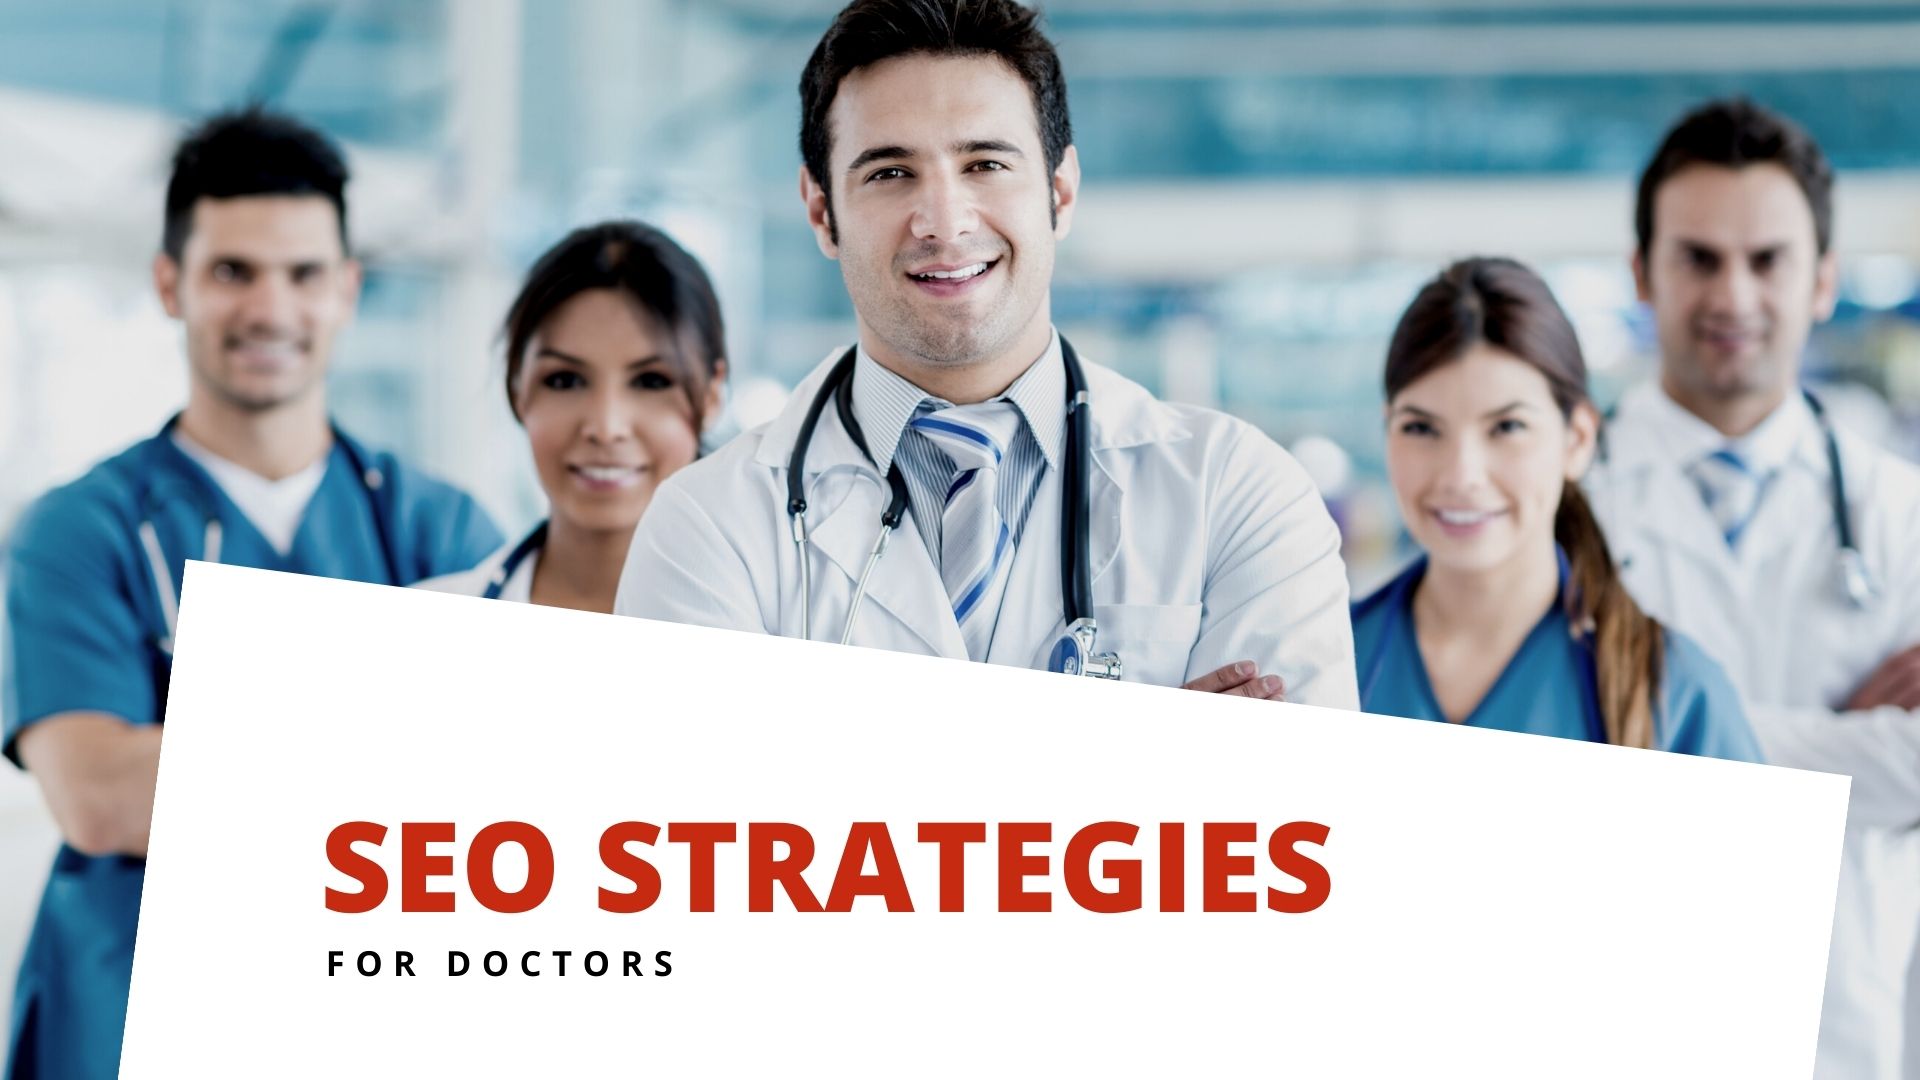 SEO tips for doctors and medical practices